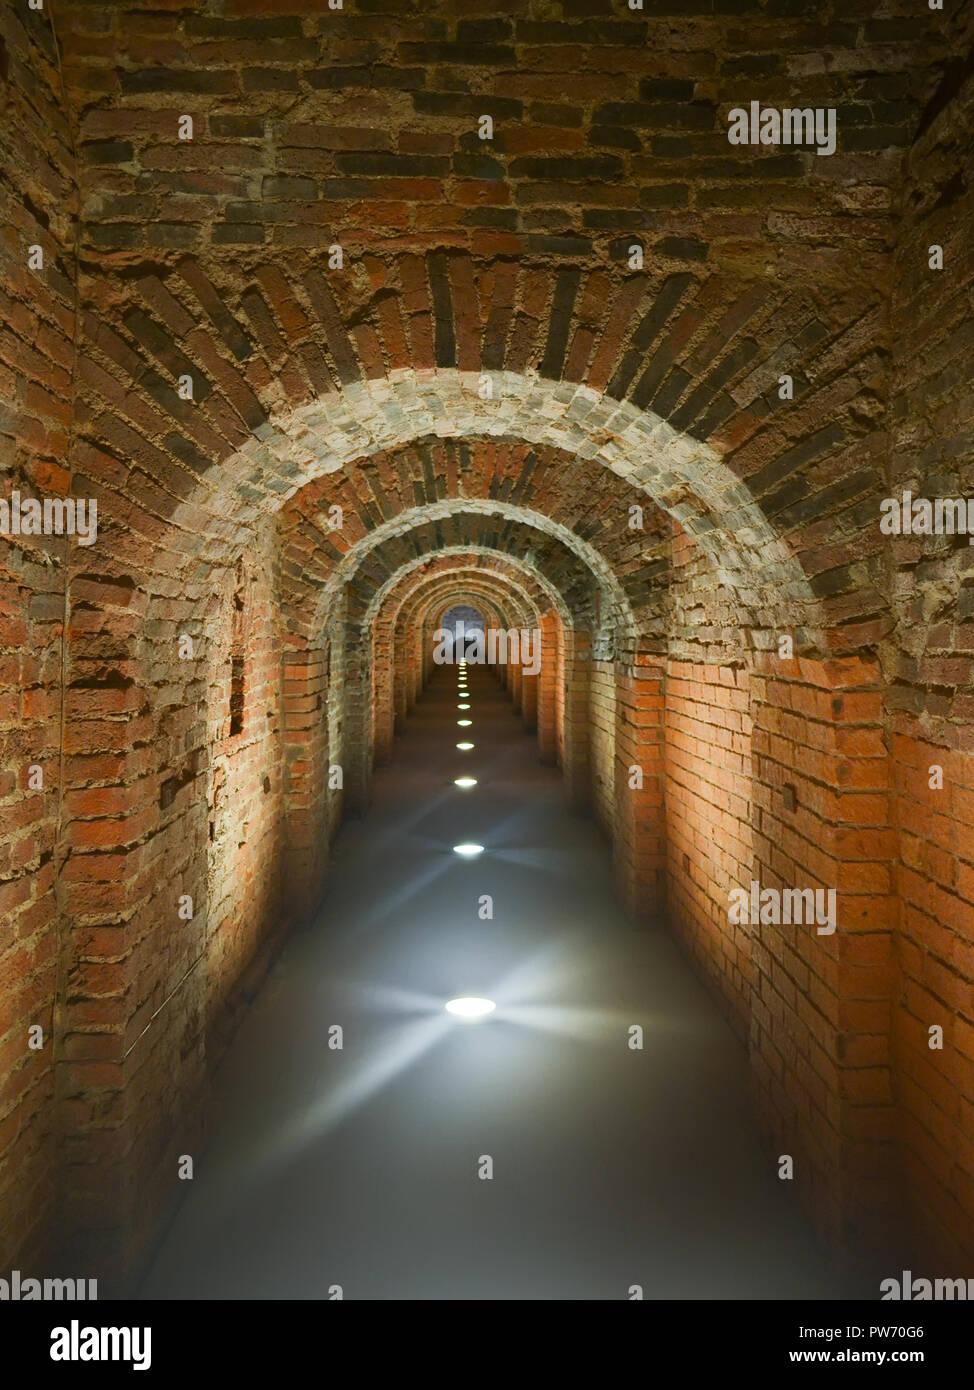 Dark brick long mystical arched corridor illuminated in the floor. Catacombs of Peter-Pavel's Fortress in St. Petersburg Stock Photo